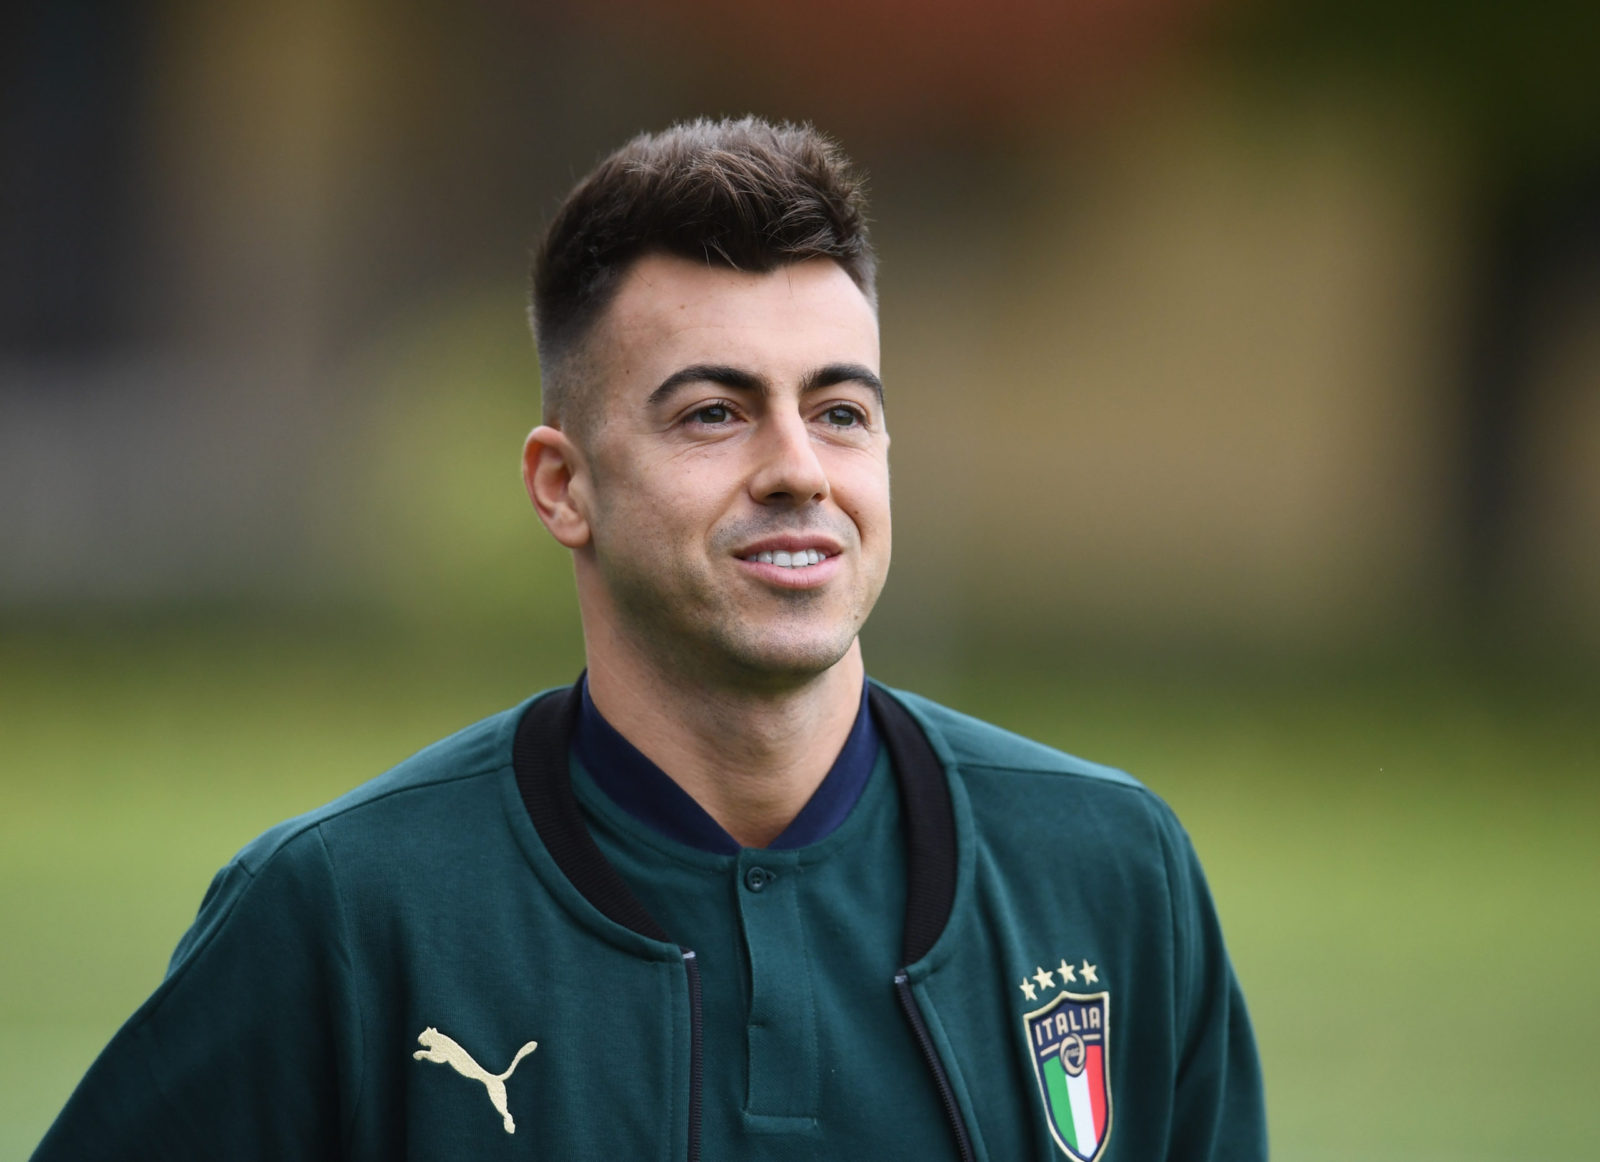 Luciano Spalletti has called up Stephan El Shaarawy to replace Nicolò Zaniolo, who left Coverciano along with Sandro Tonali.